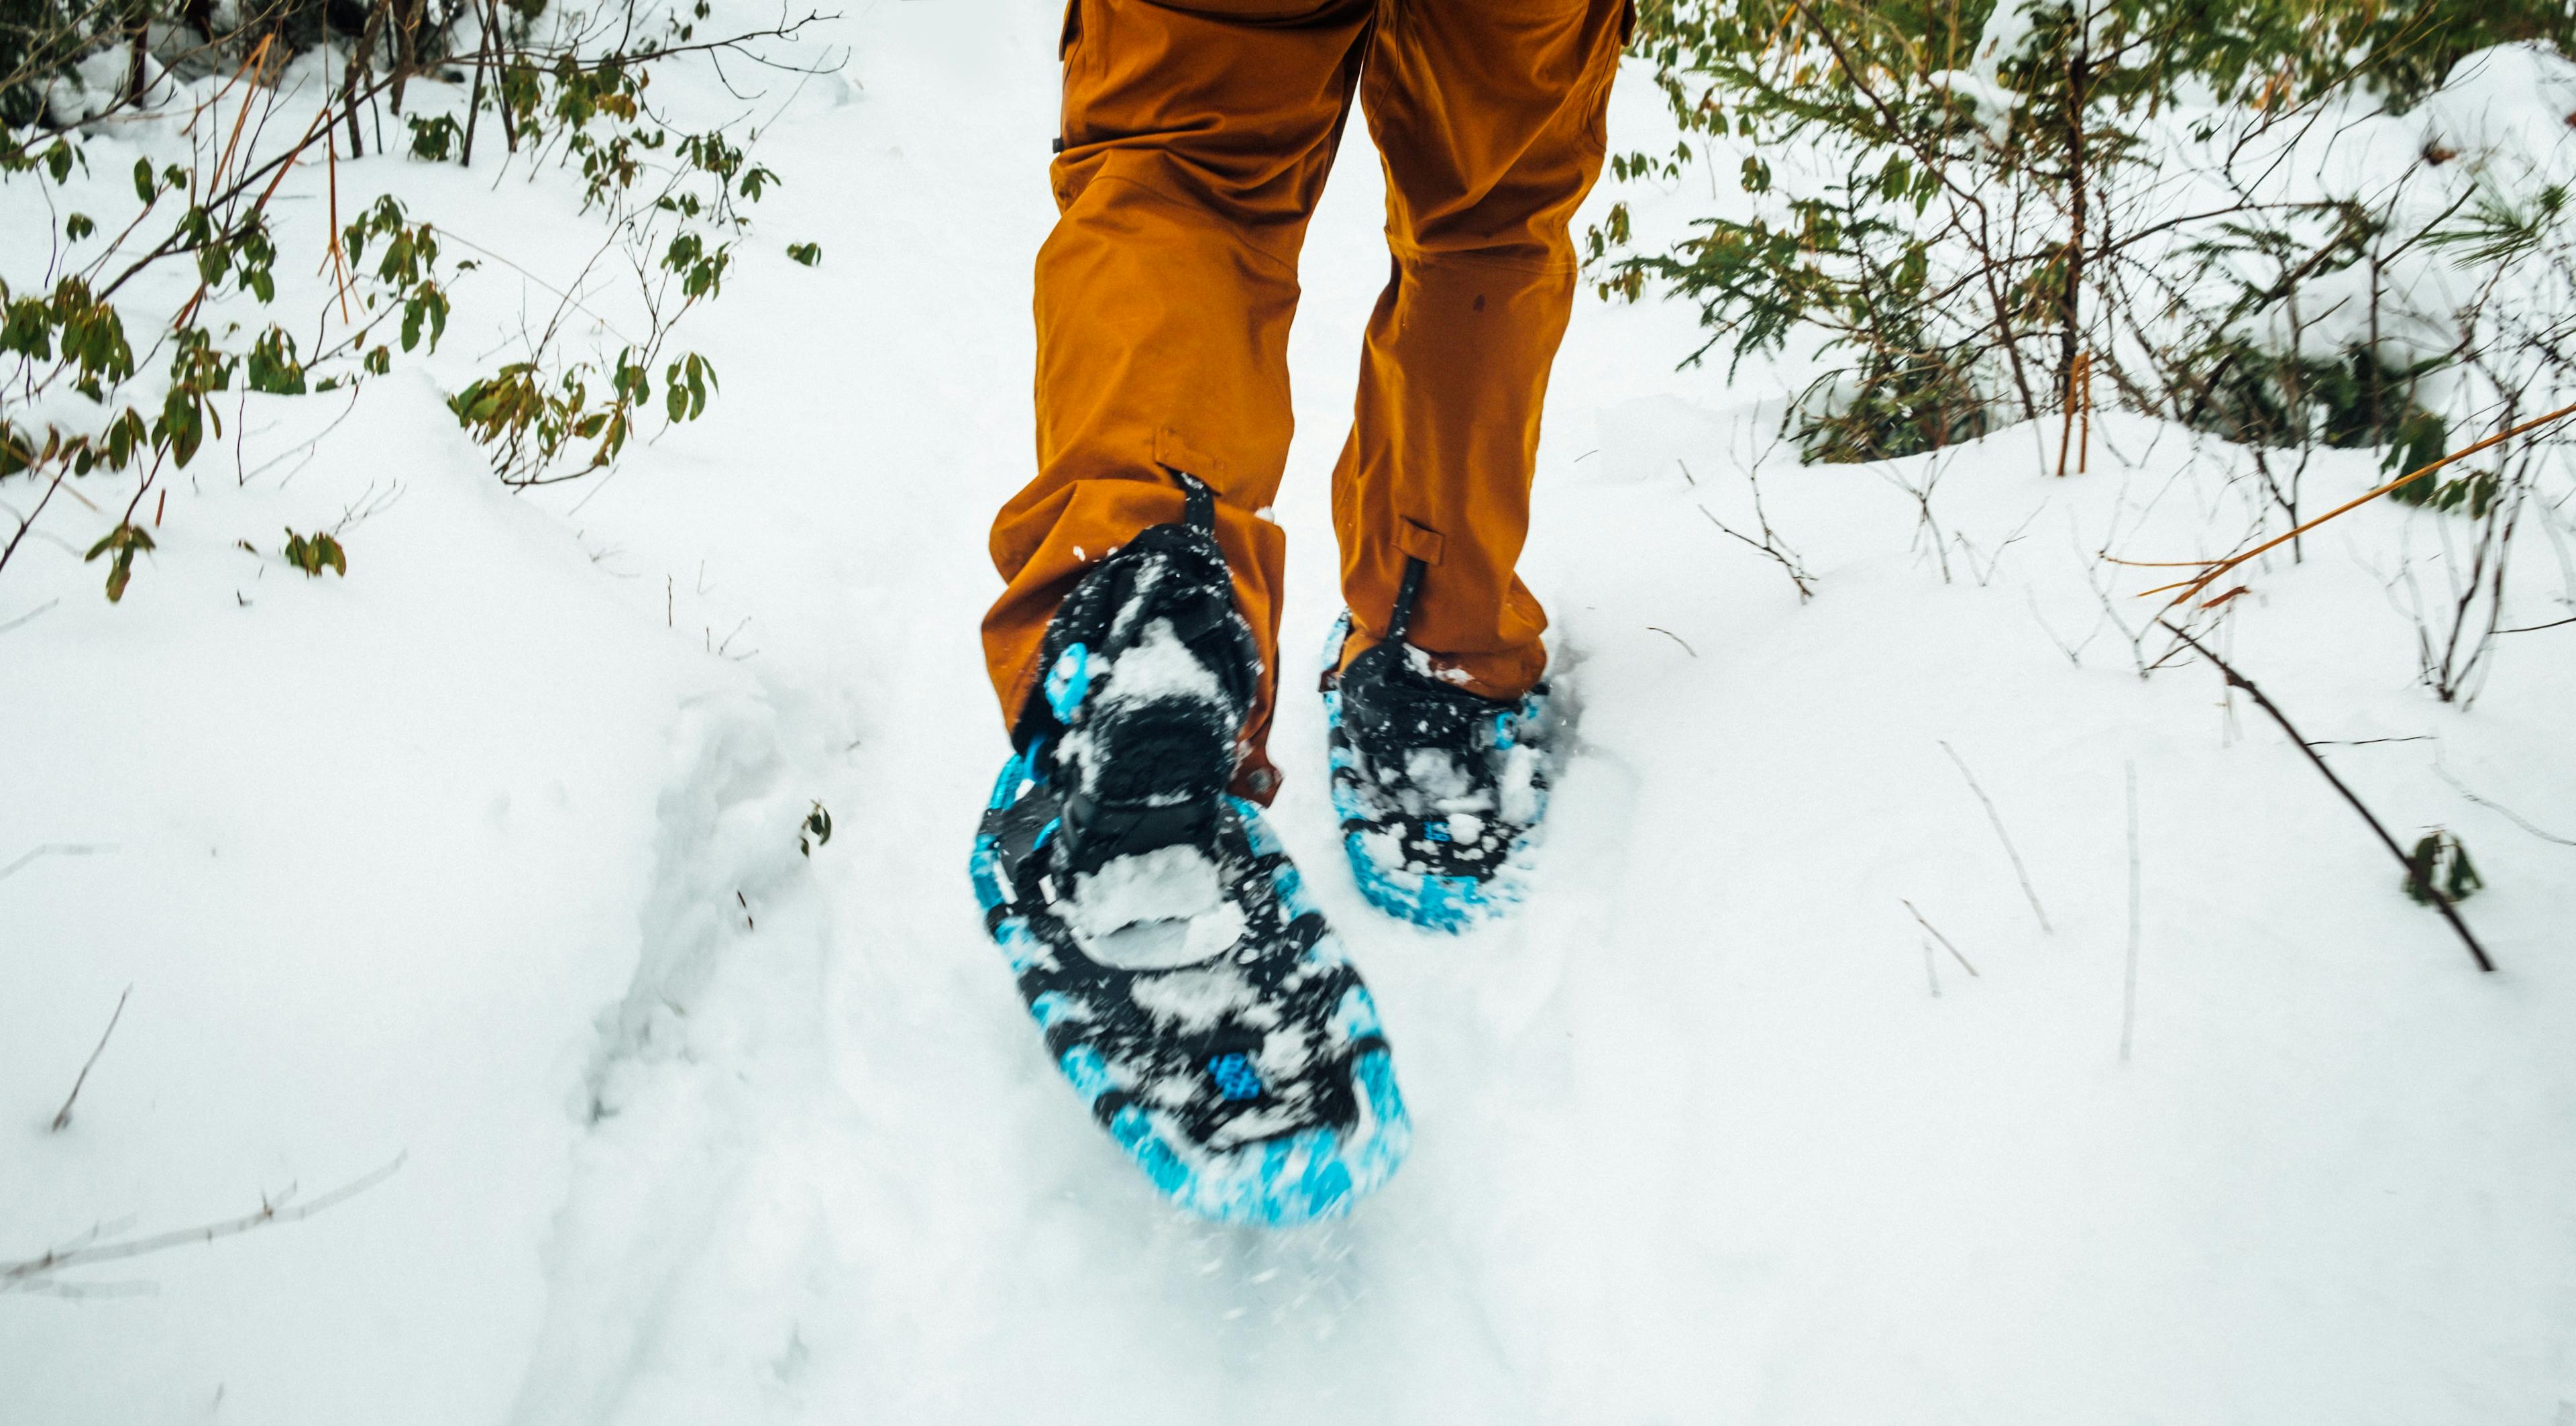 Man using snow shoes to walk over deep snow on holiday